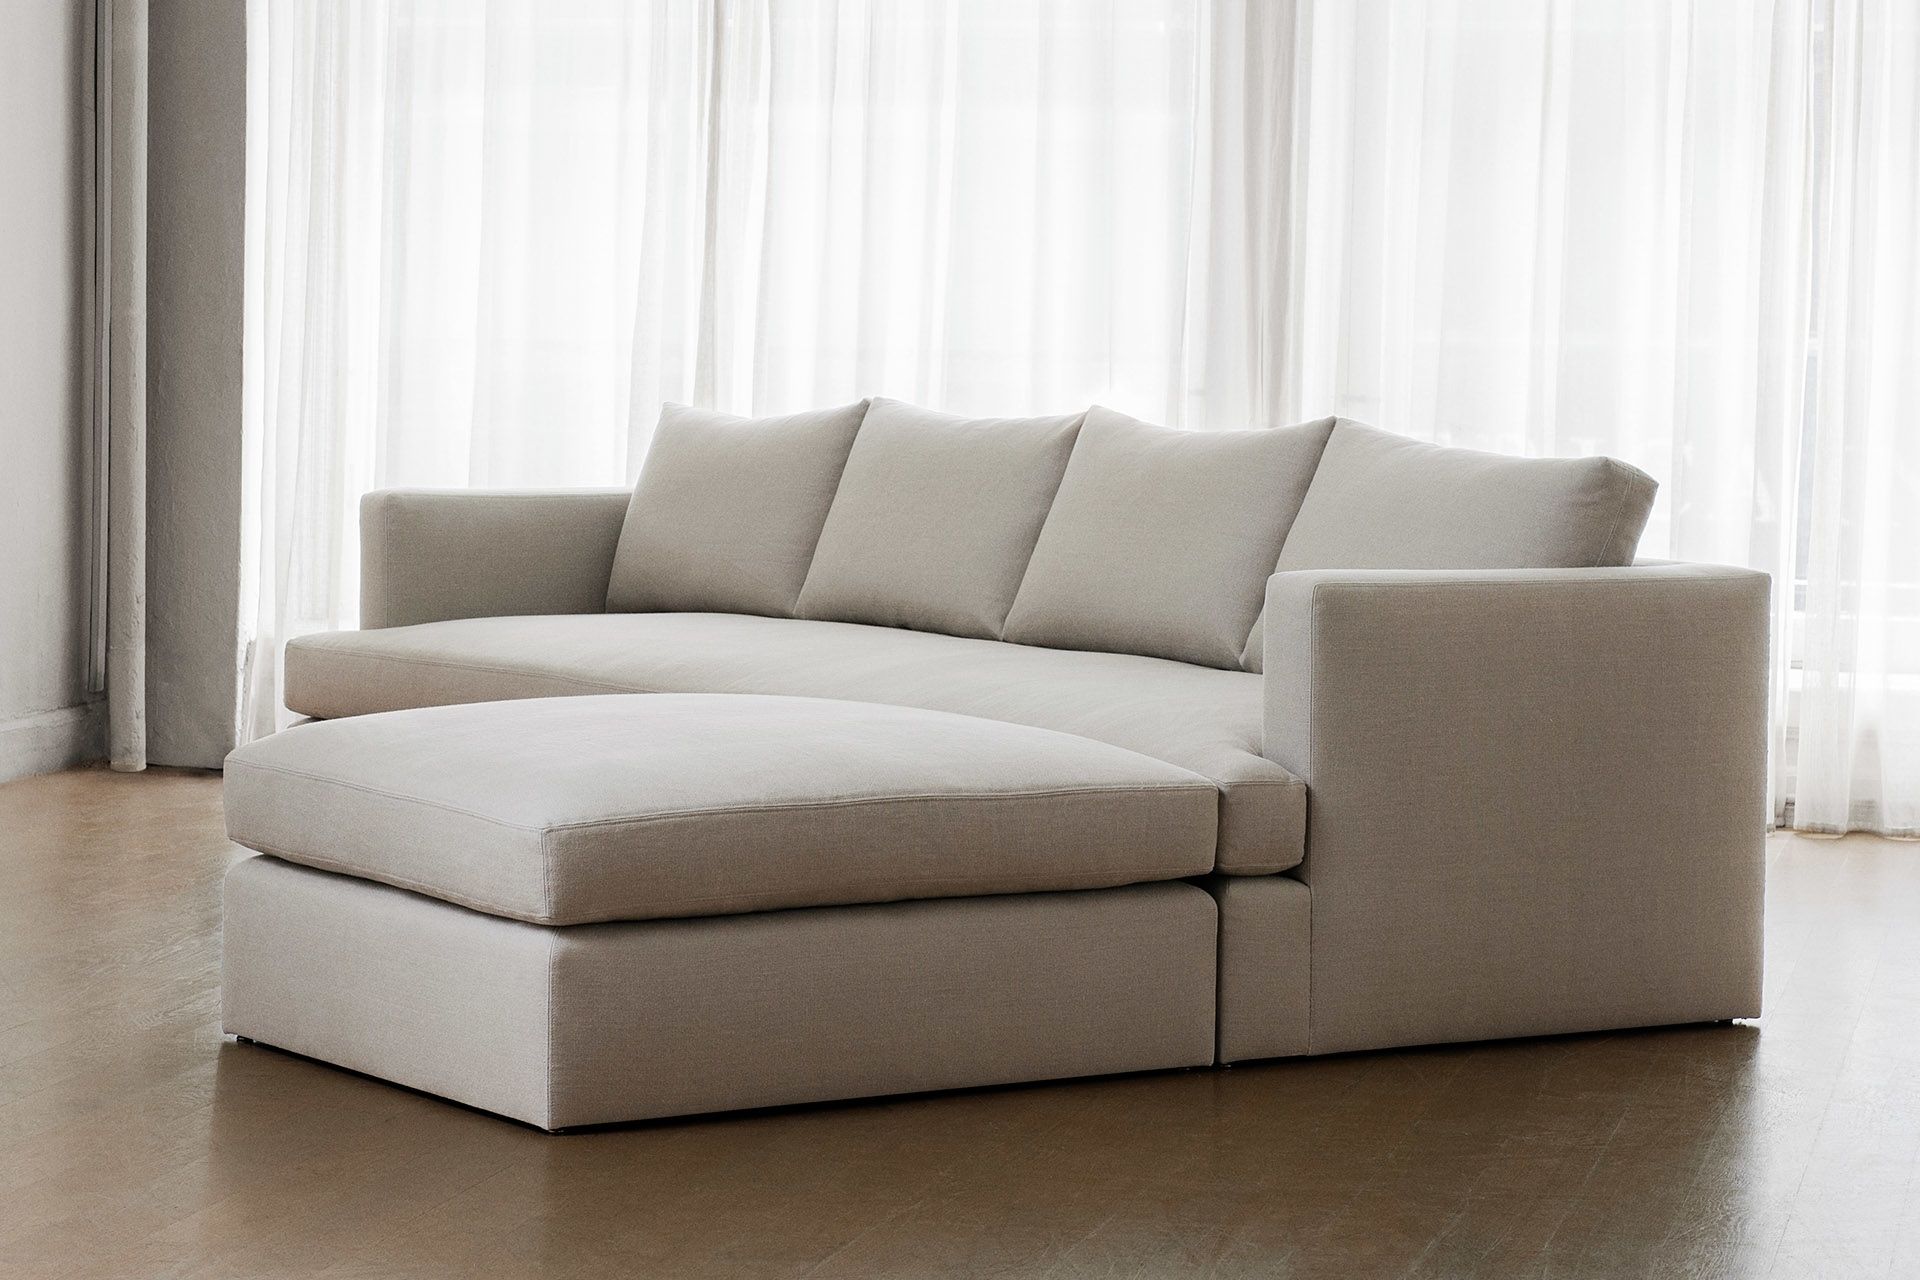 Inspirational Sofa With Ottoman 45 About Remodel Office Sofa Ideas Pertaining To Sofas With Ottoman (View 2 of 10)